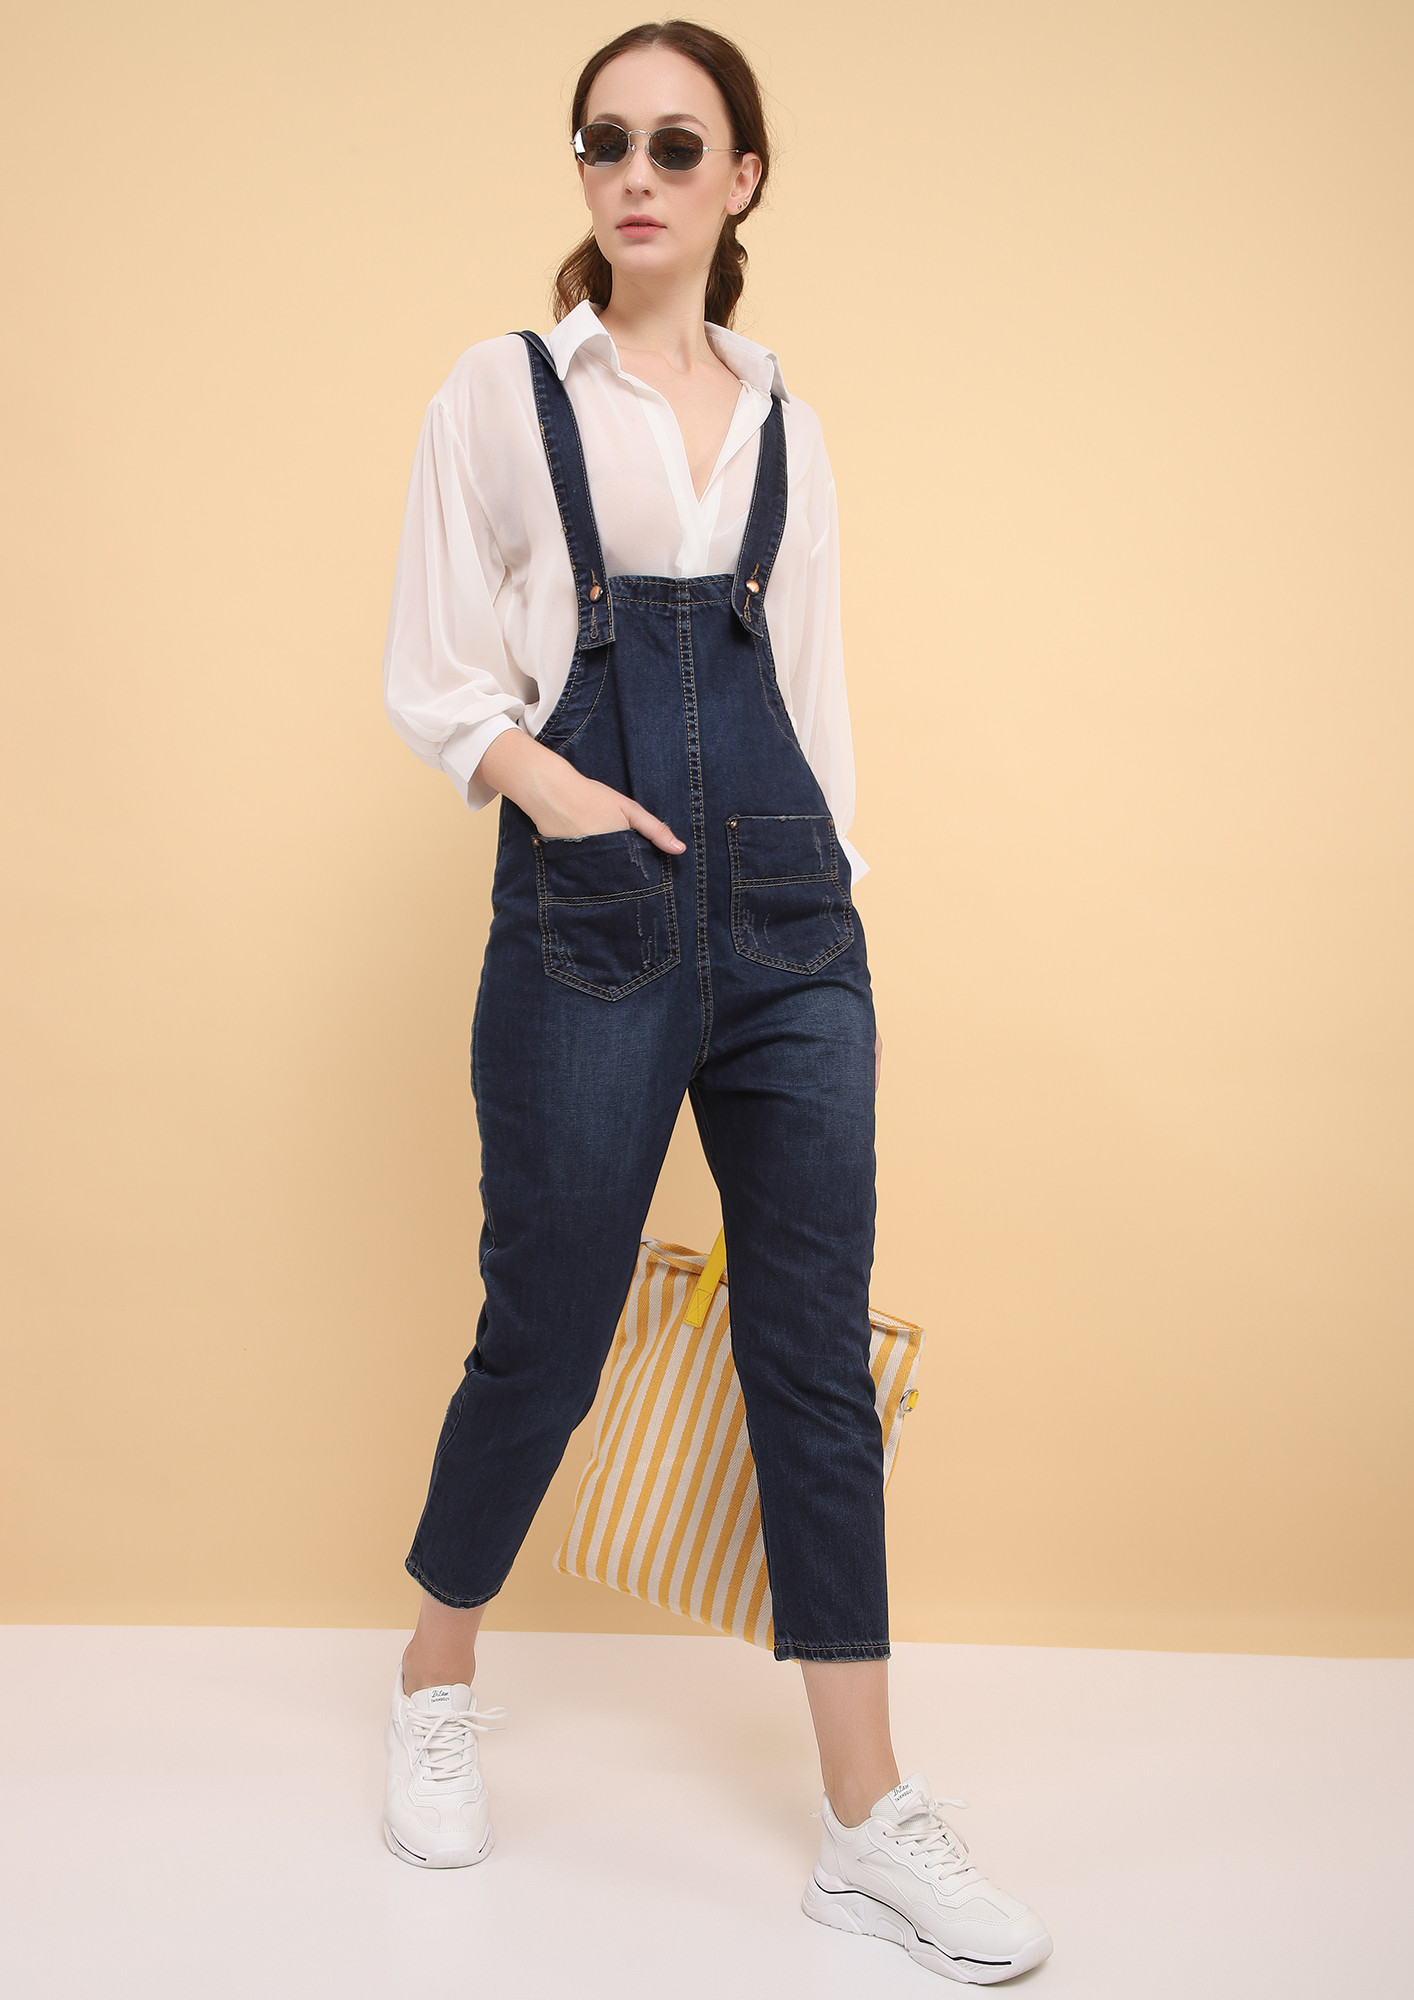 LAIDBACK-COOL ALL DAY BLUE DENIM DUNGAREE